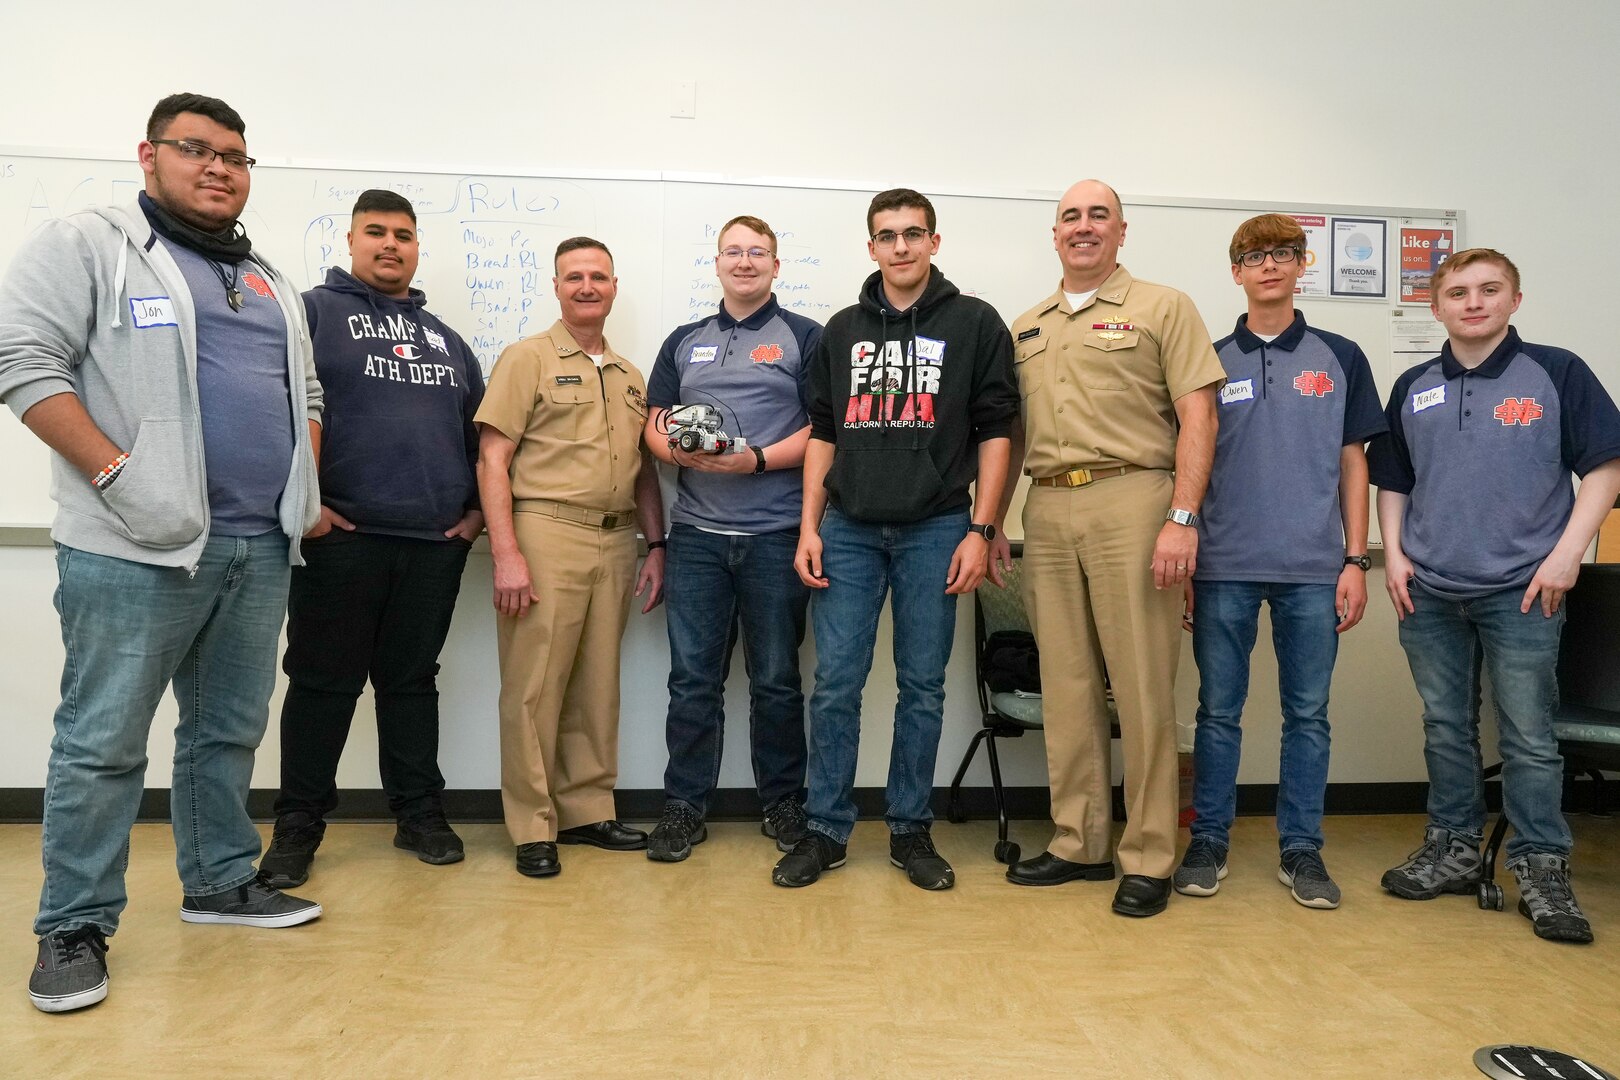 IMAGE: Vice Adm. William Galinis, third from left, Naval Surface Warfare Center Dahlgren Division Commanding Officer Capt. Philip “Phil” Mlynarski, third from right, take a picture with the North Stafford High School robotics team during the Innovation Challenge @Dahlgren. The robotics competition featured teams from 12 area public, private and governor’s high schools vying for a total of $5000 in cash prizes.